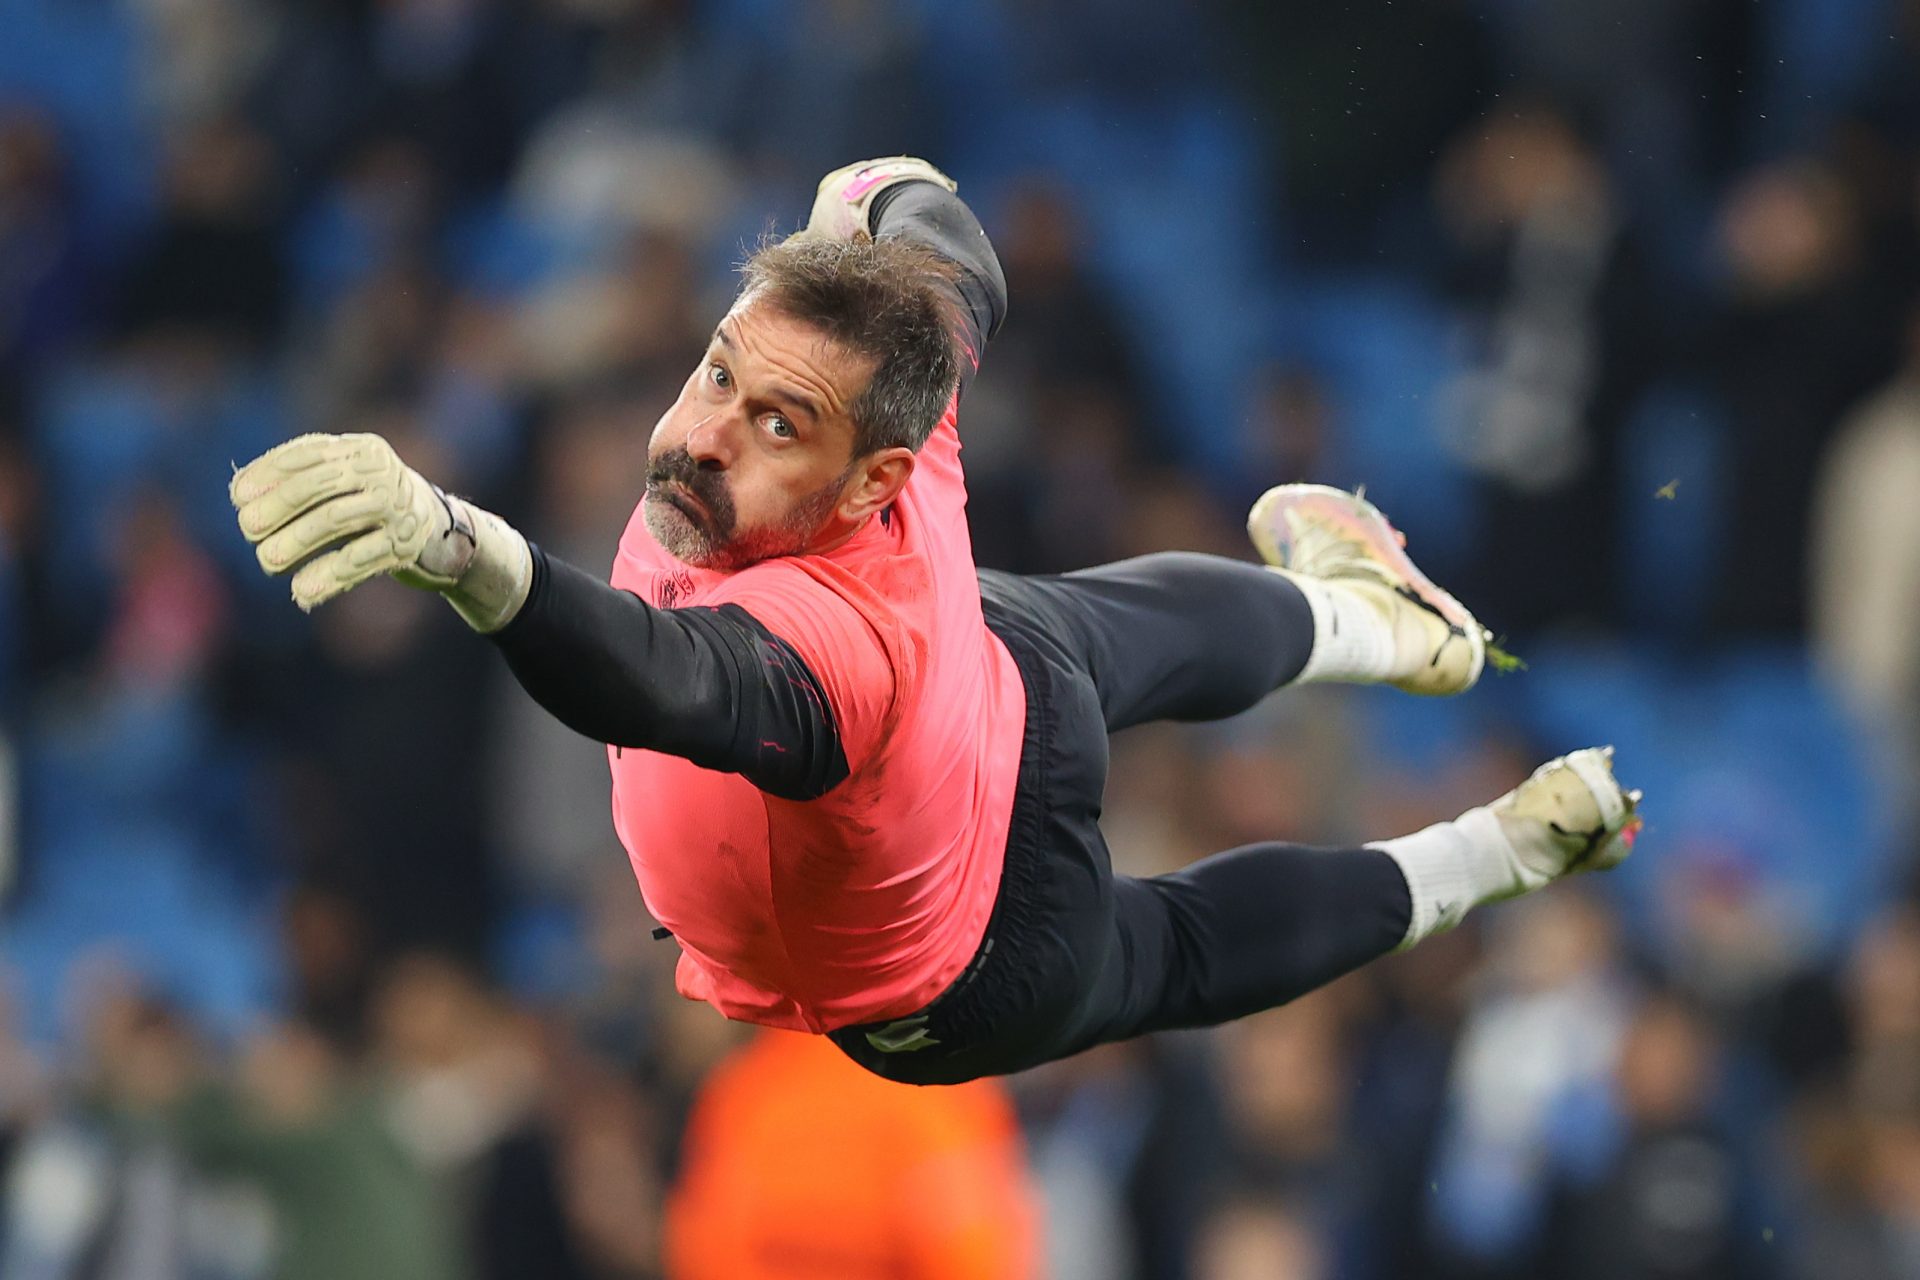 Manchester City's substitute goalkeeper is banned from the championship party after... he attacked his teammate!